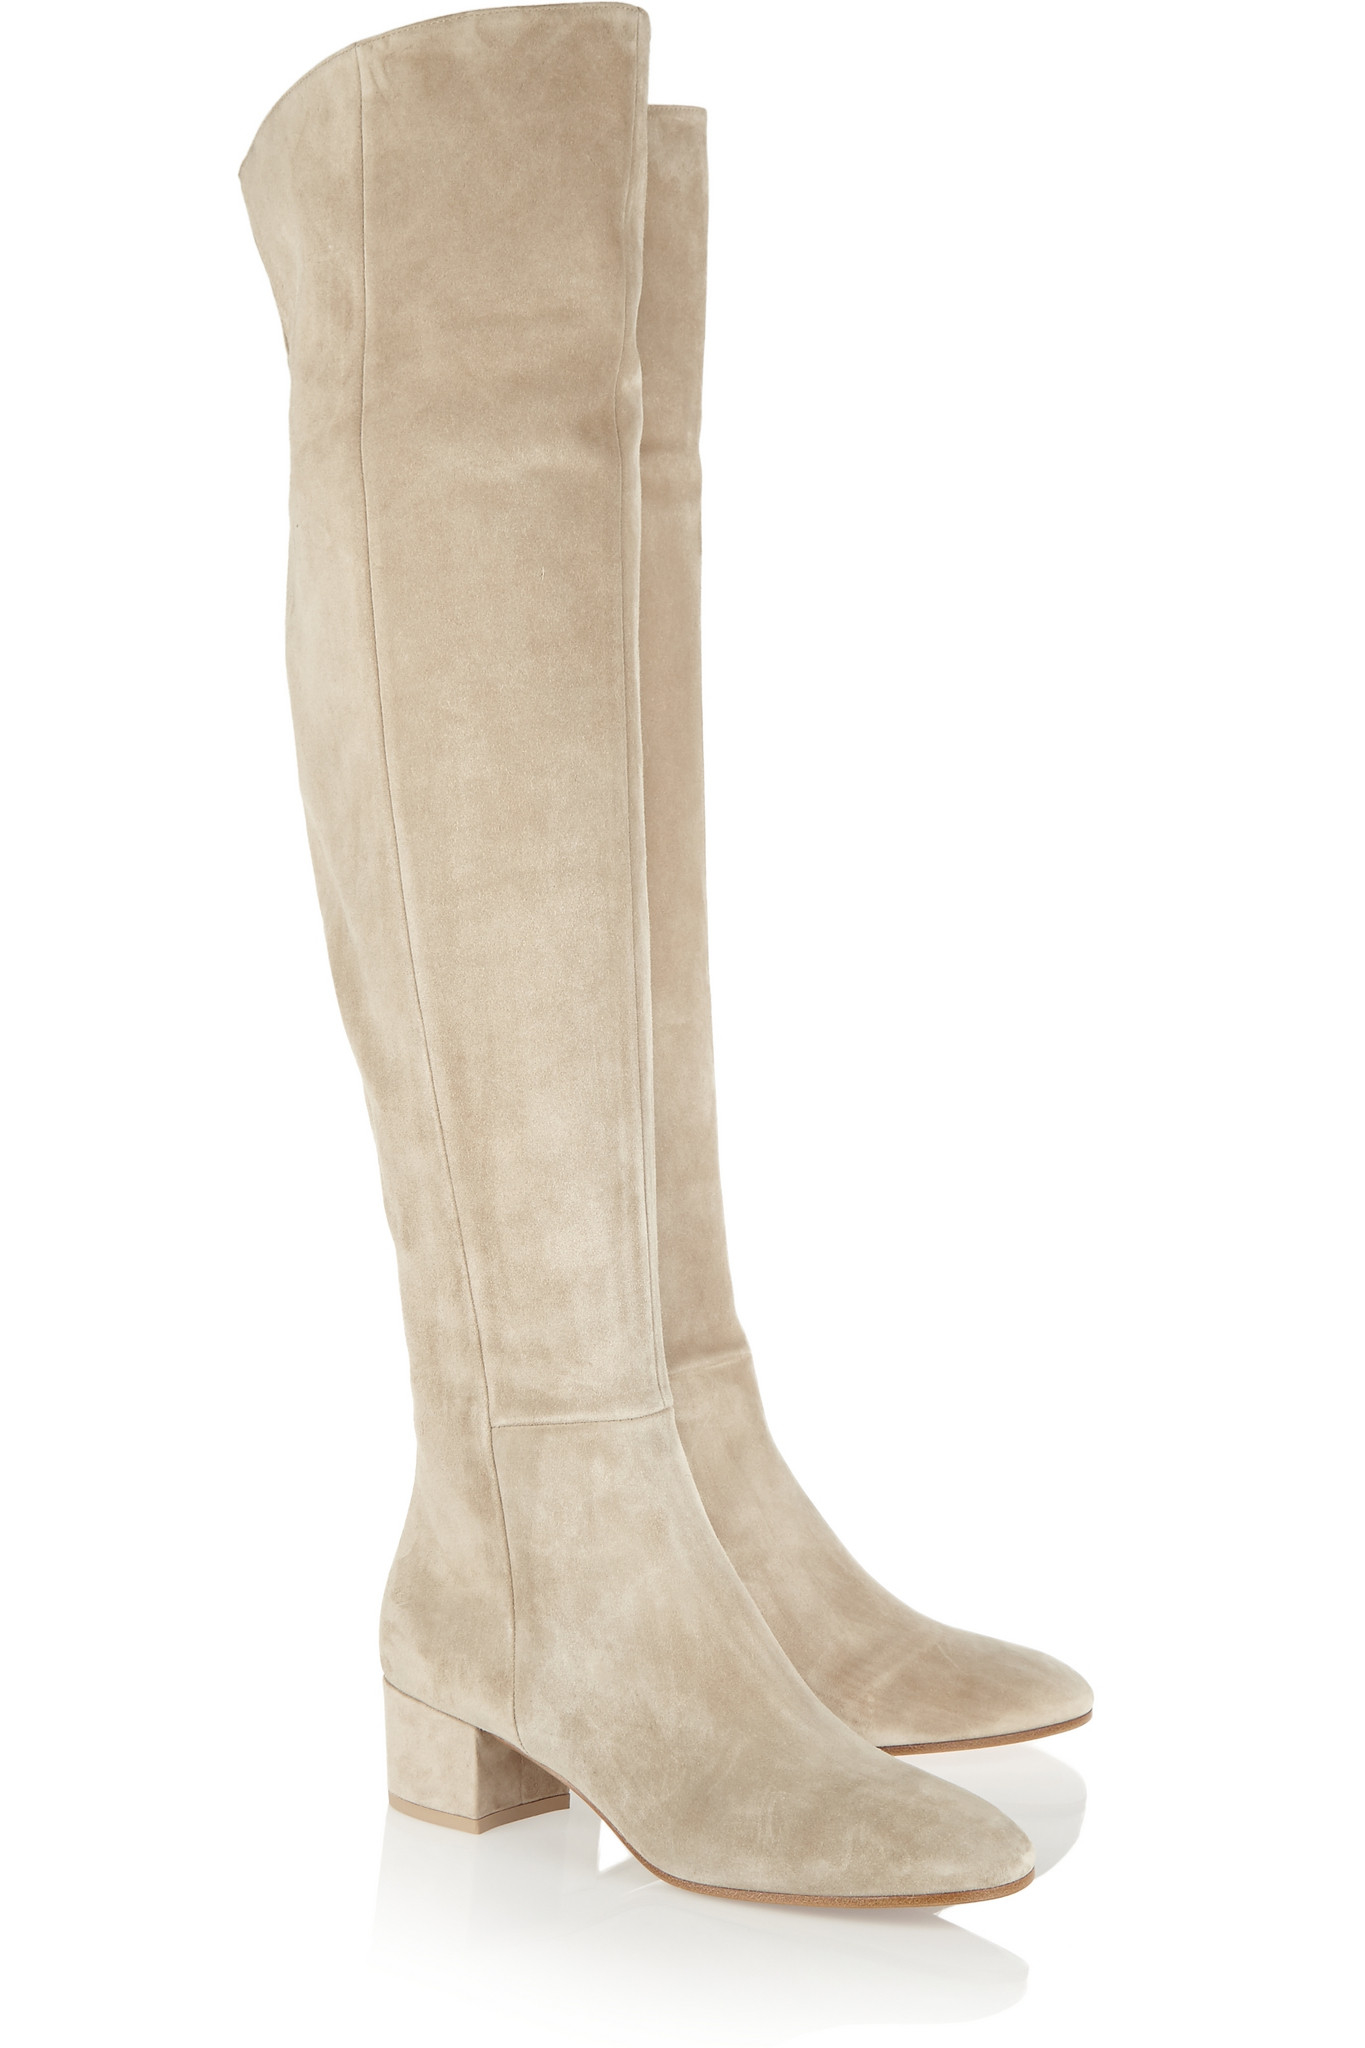 Gianvito rossi Suede Over-the-knee Boots in Multicolor | Lyst